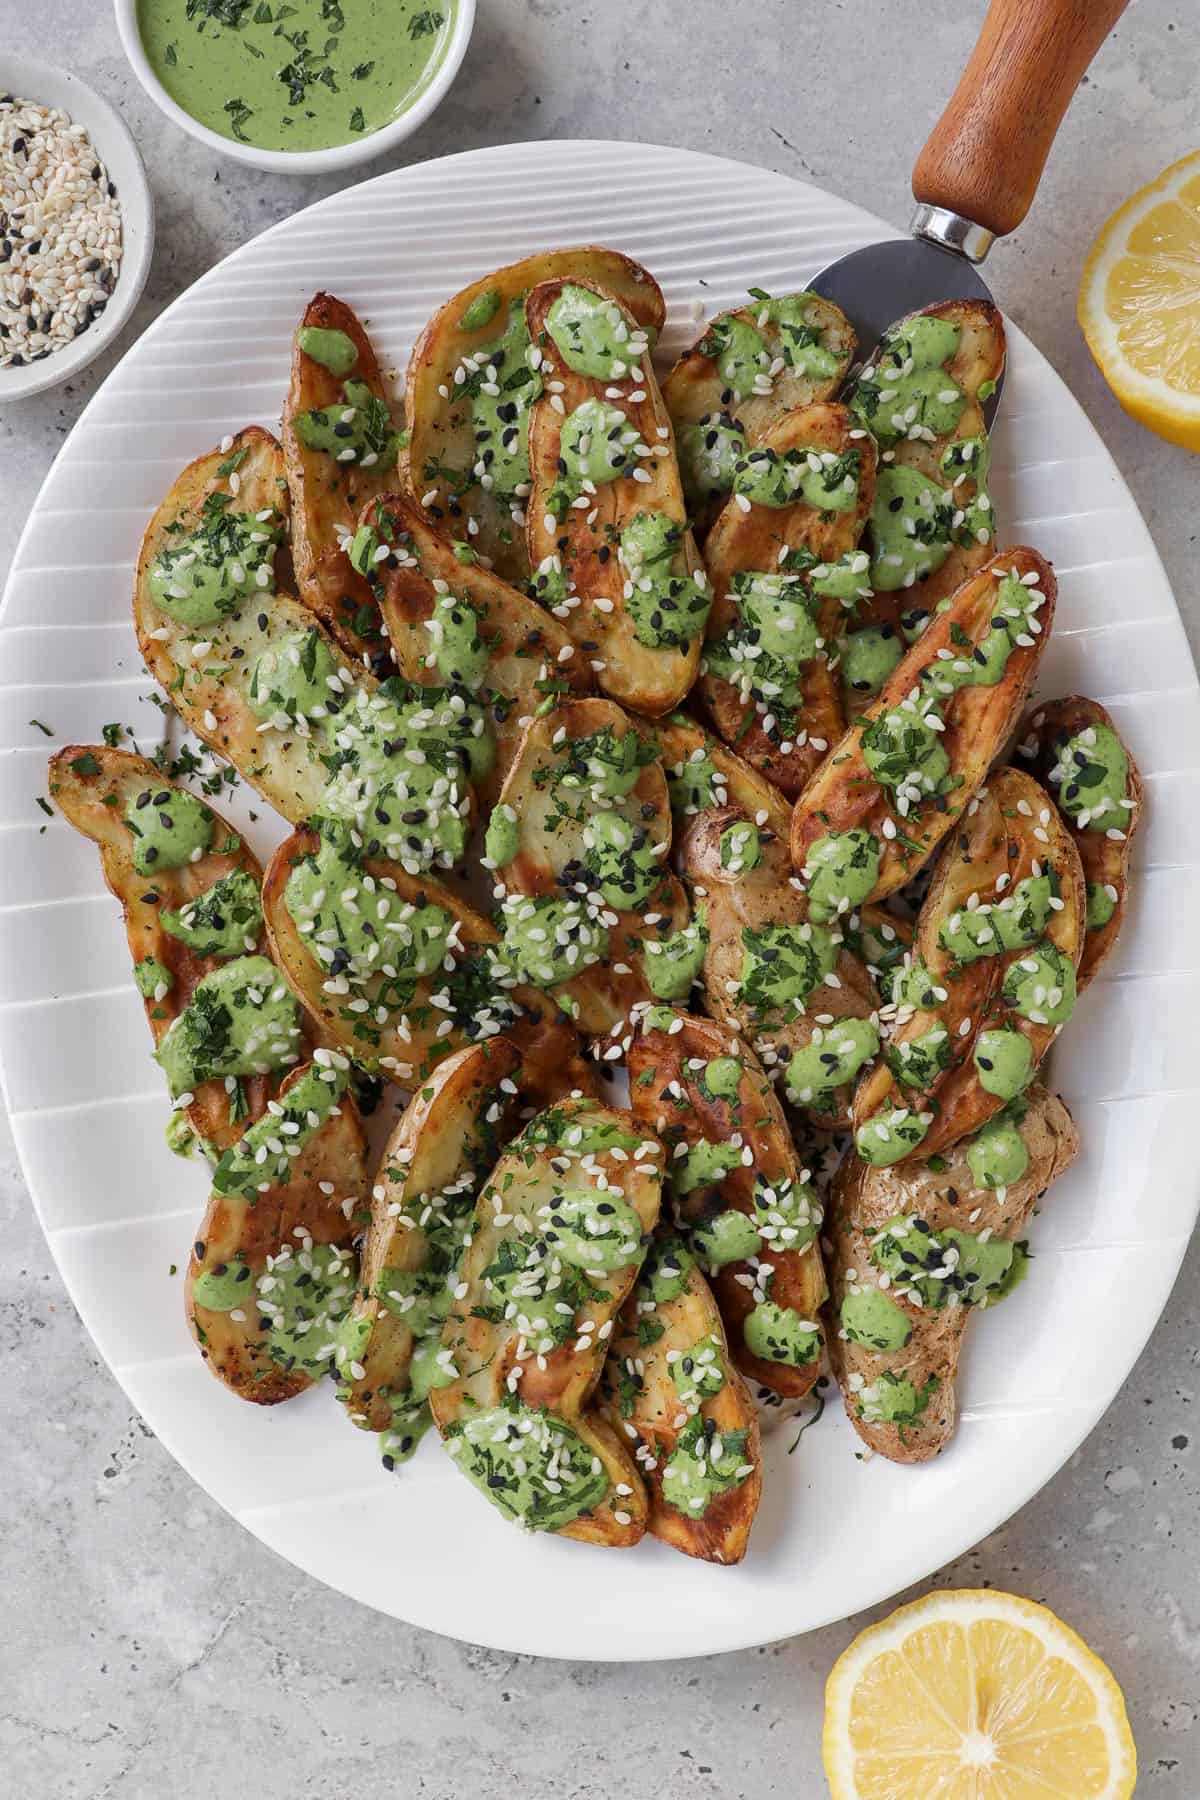 Air fryer fingerling potatoes on plate with green tahini sauce and serving spoon.. Lemons, extra tahini sauce, sesame seeds on the side.